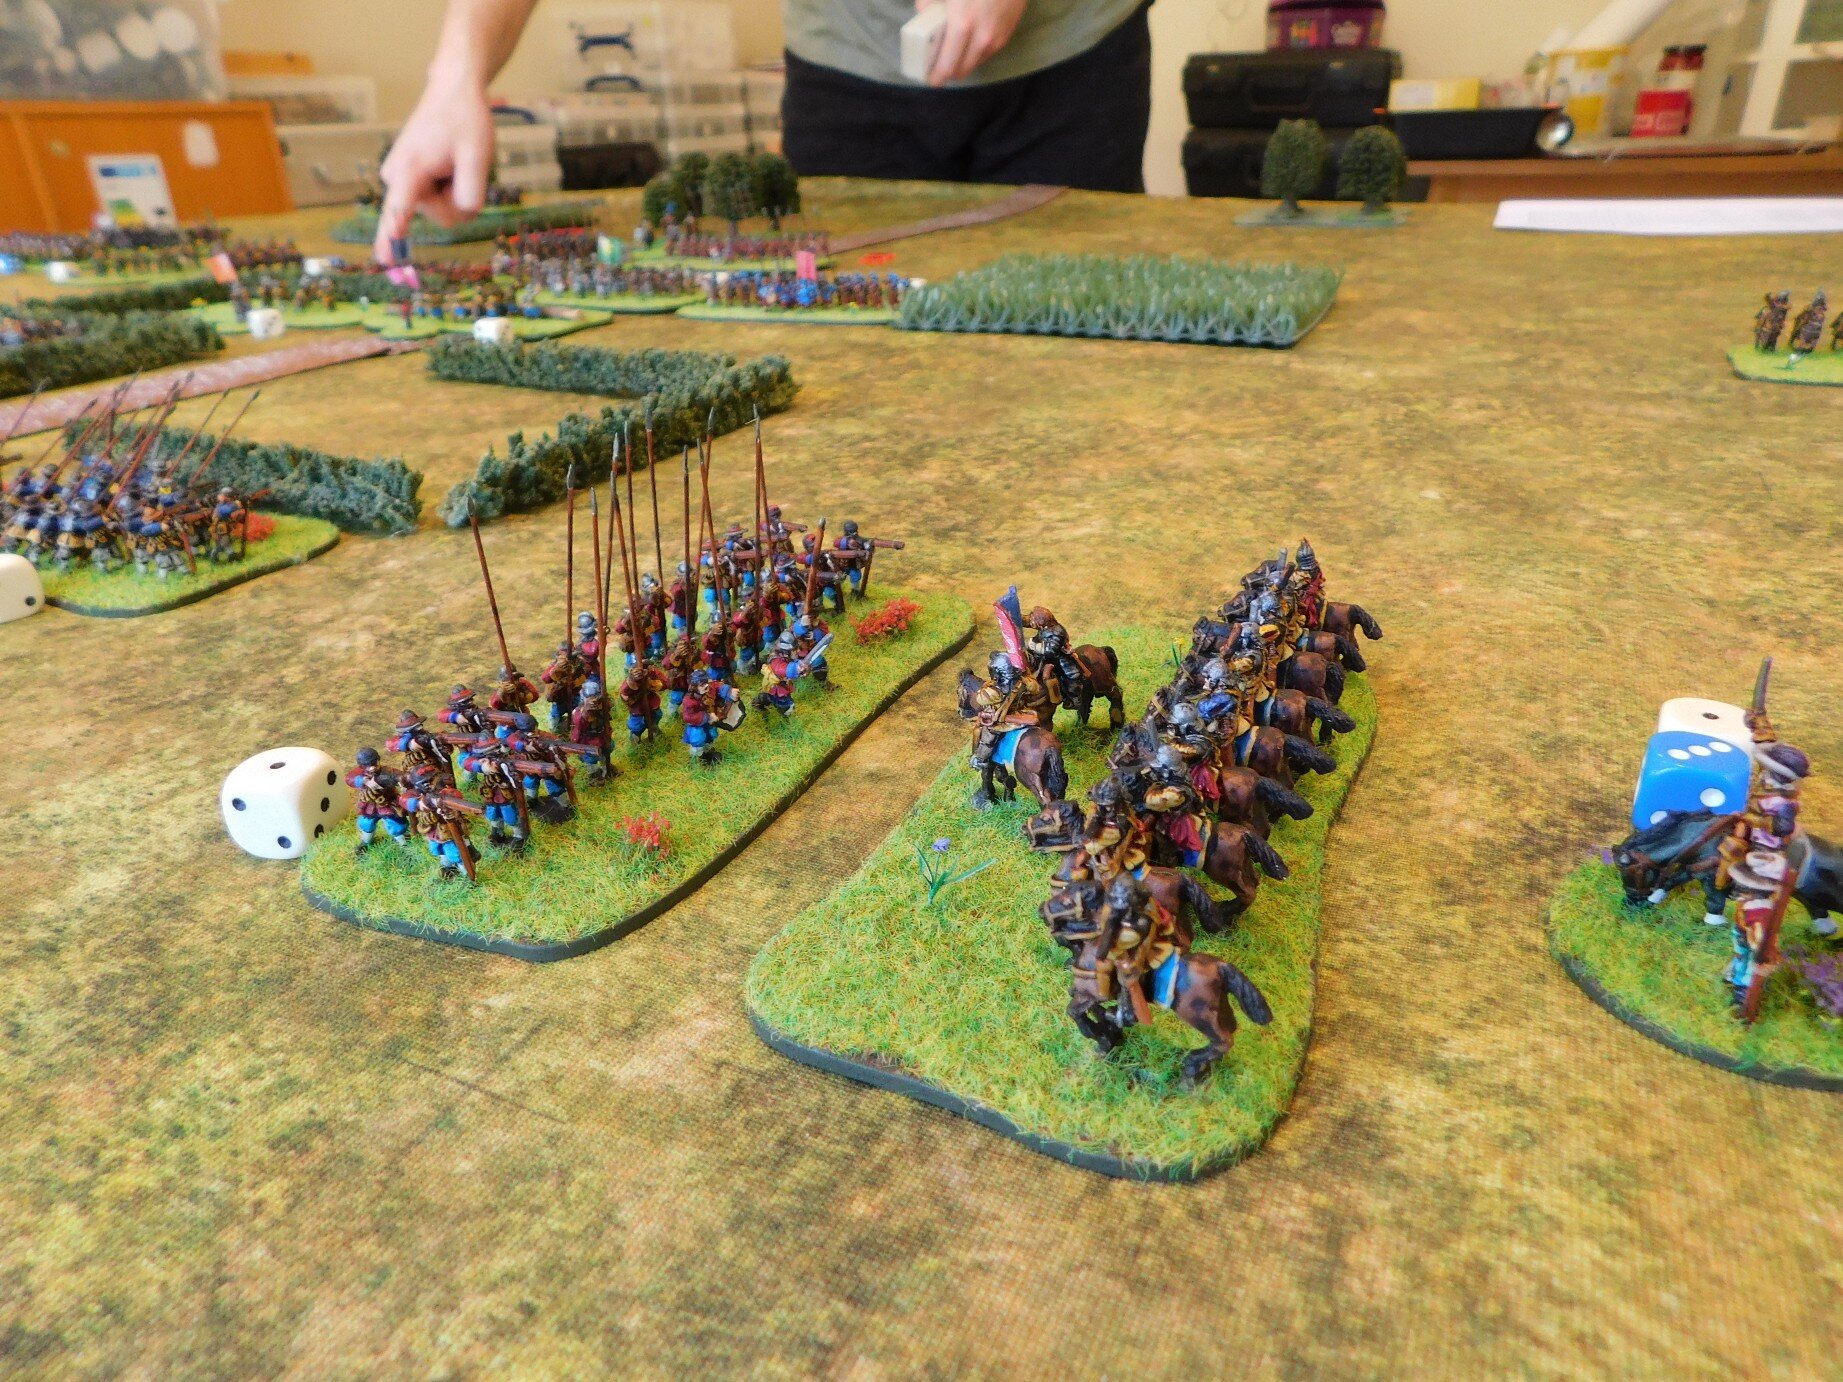 On the right, my pike prepare to repel the Royalist cavalry